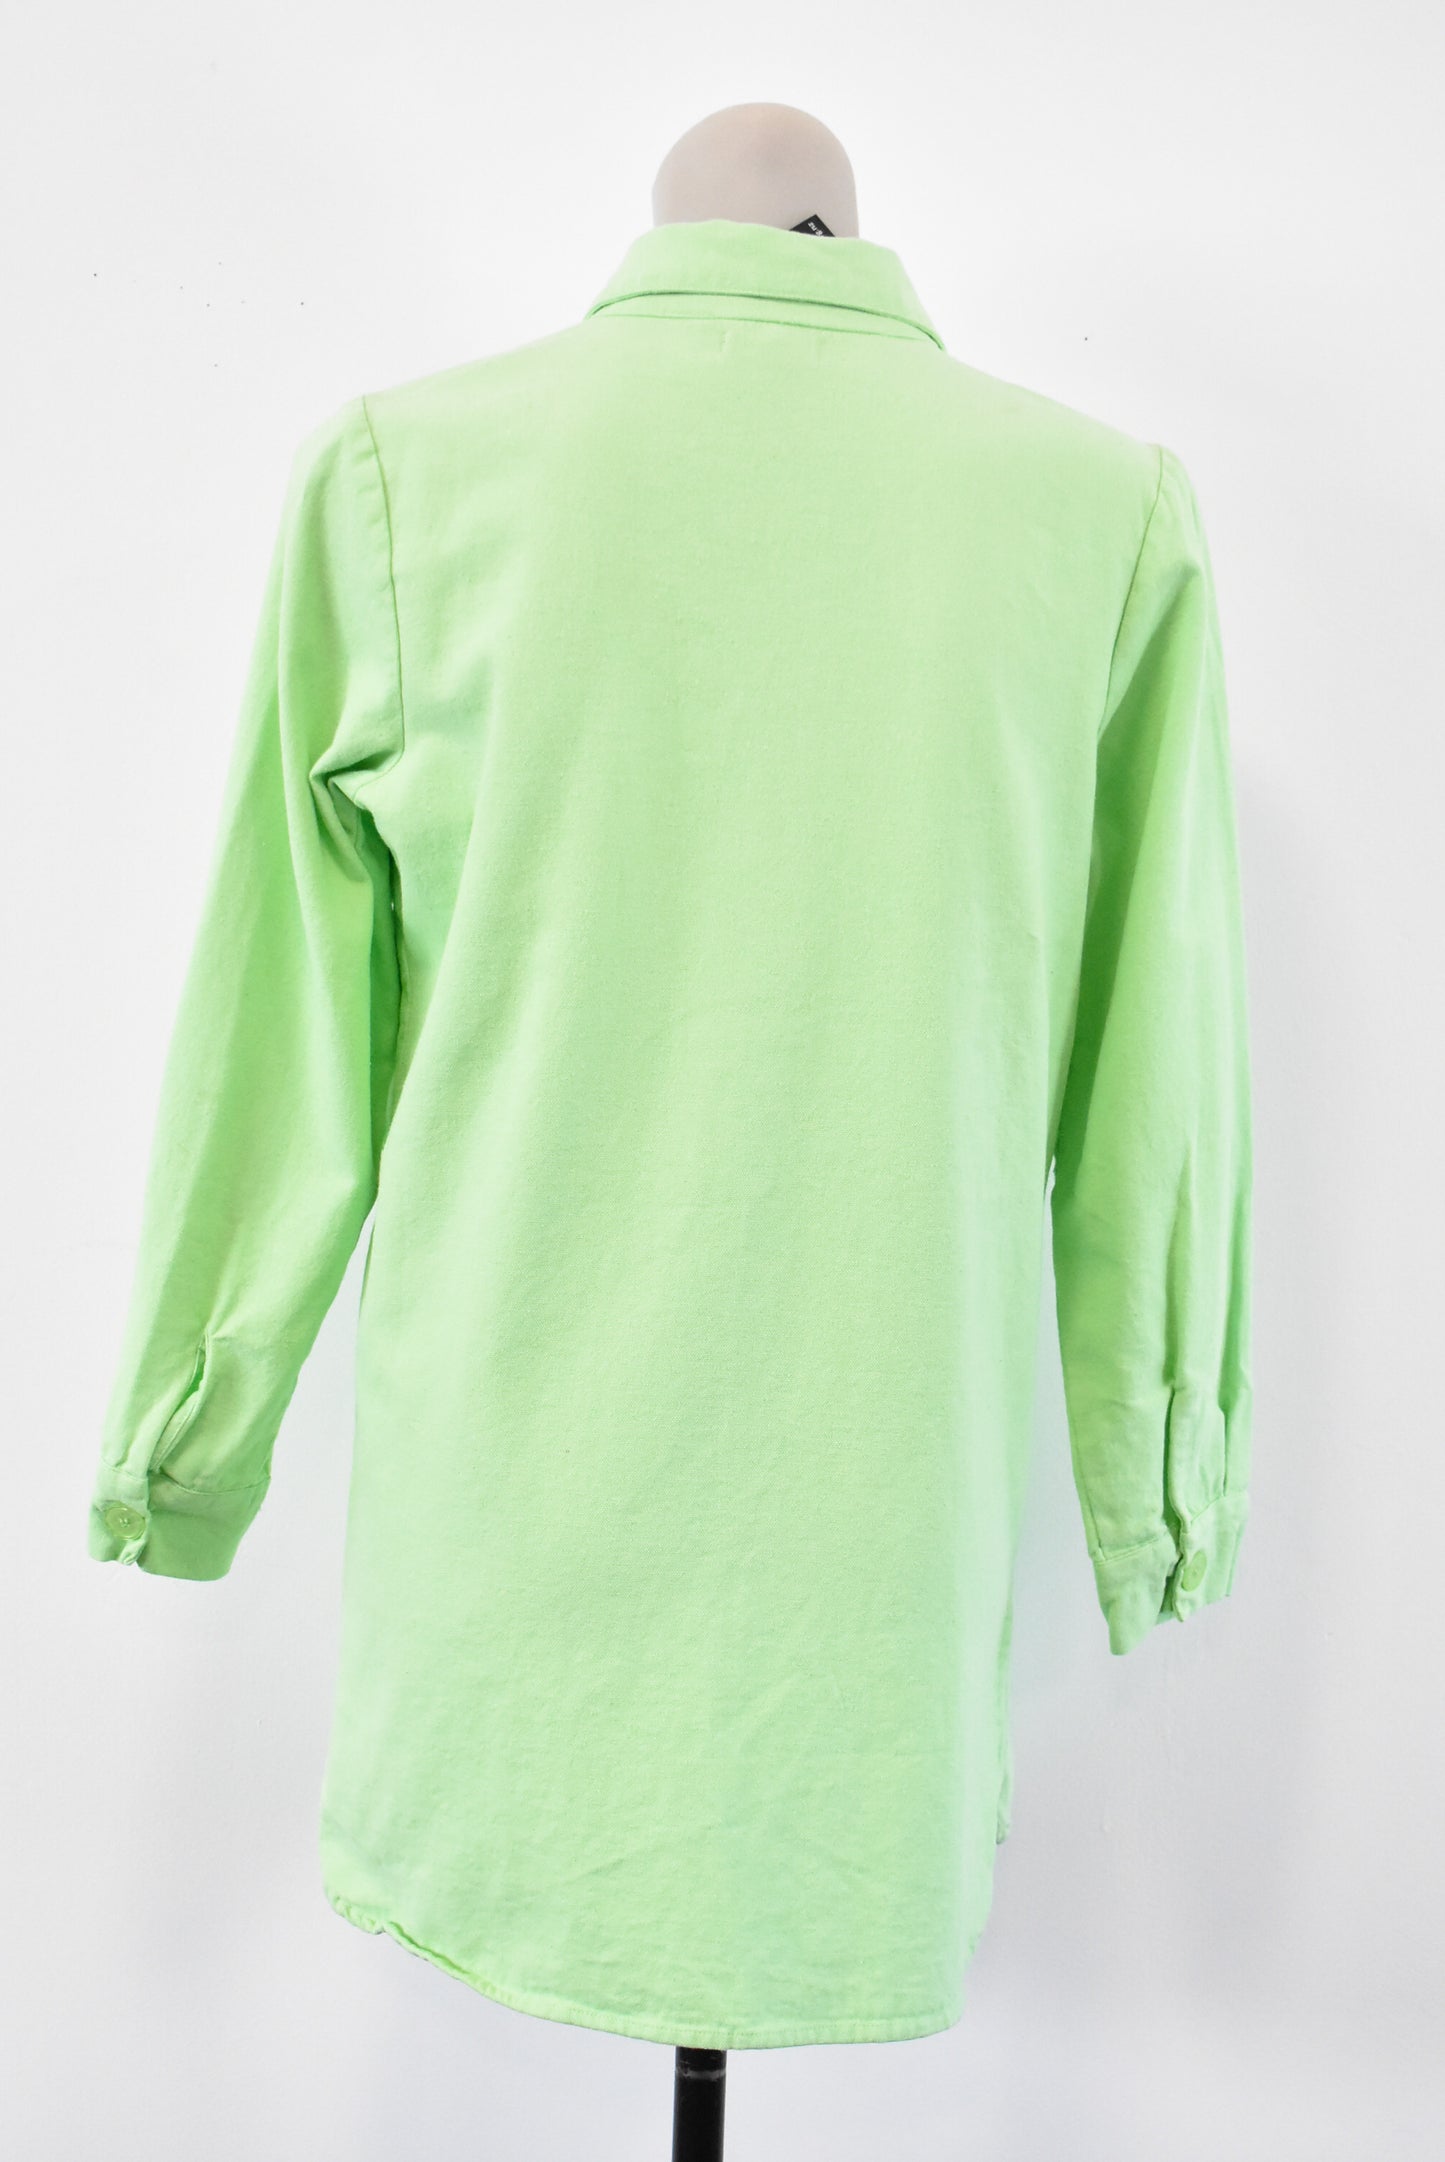 Pretty Little Thing lime green button up top, size 8